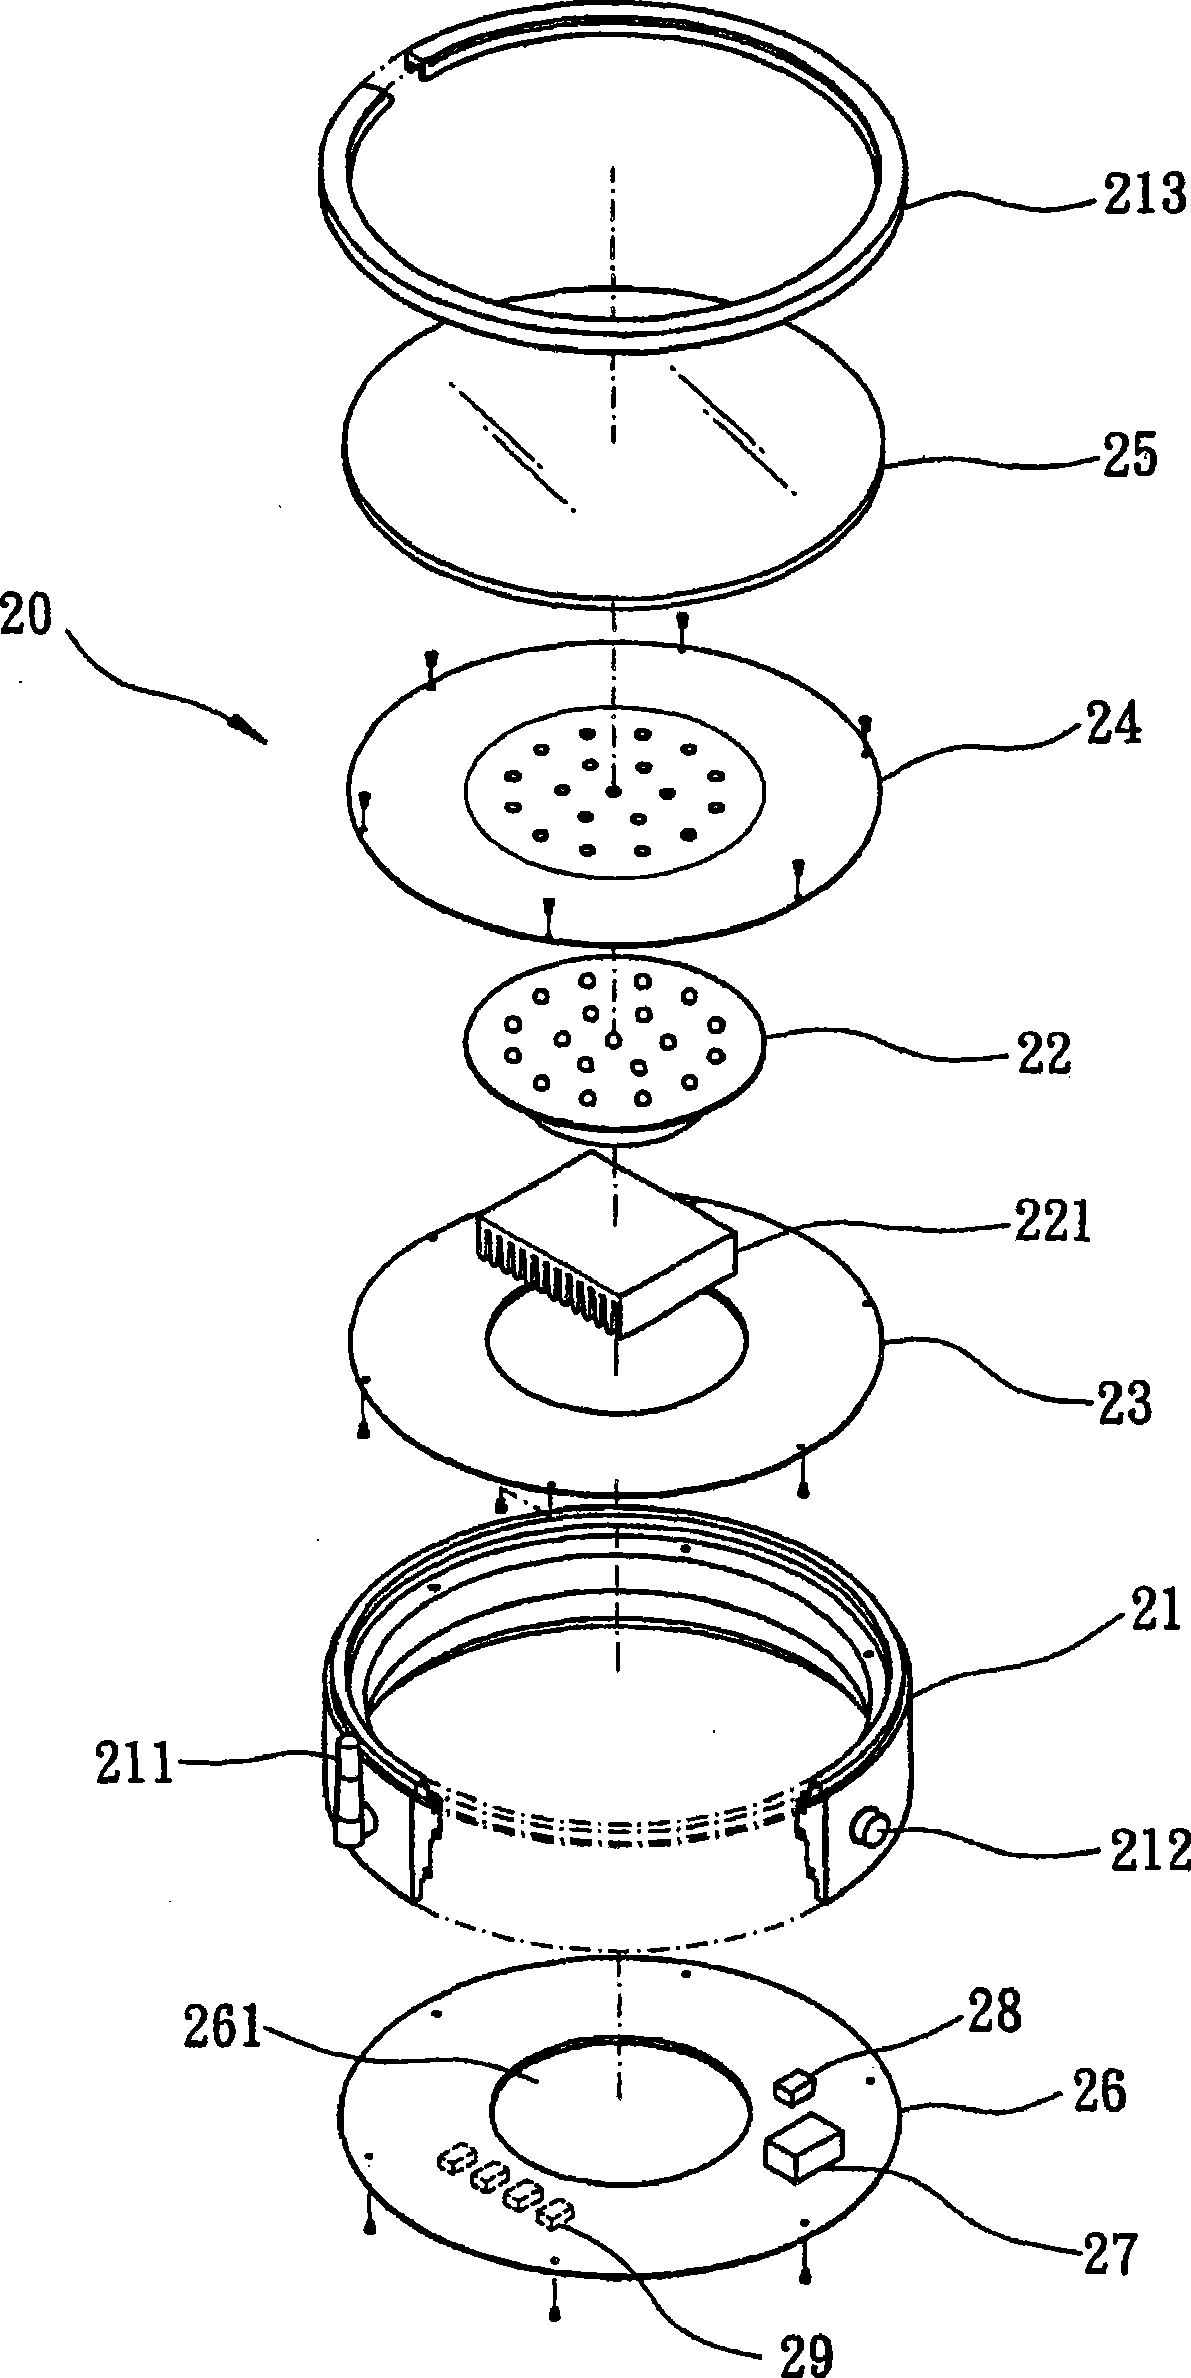 Lamp holder group with group setting function